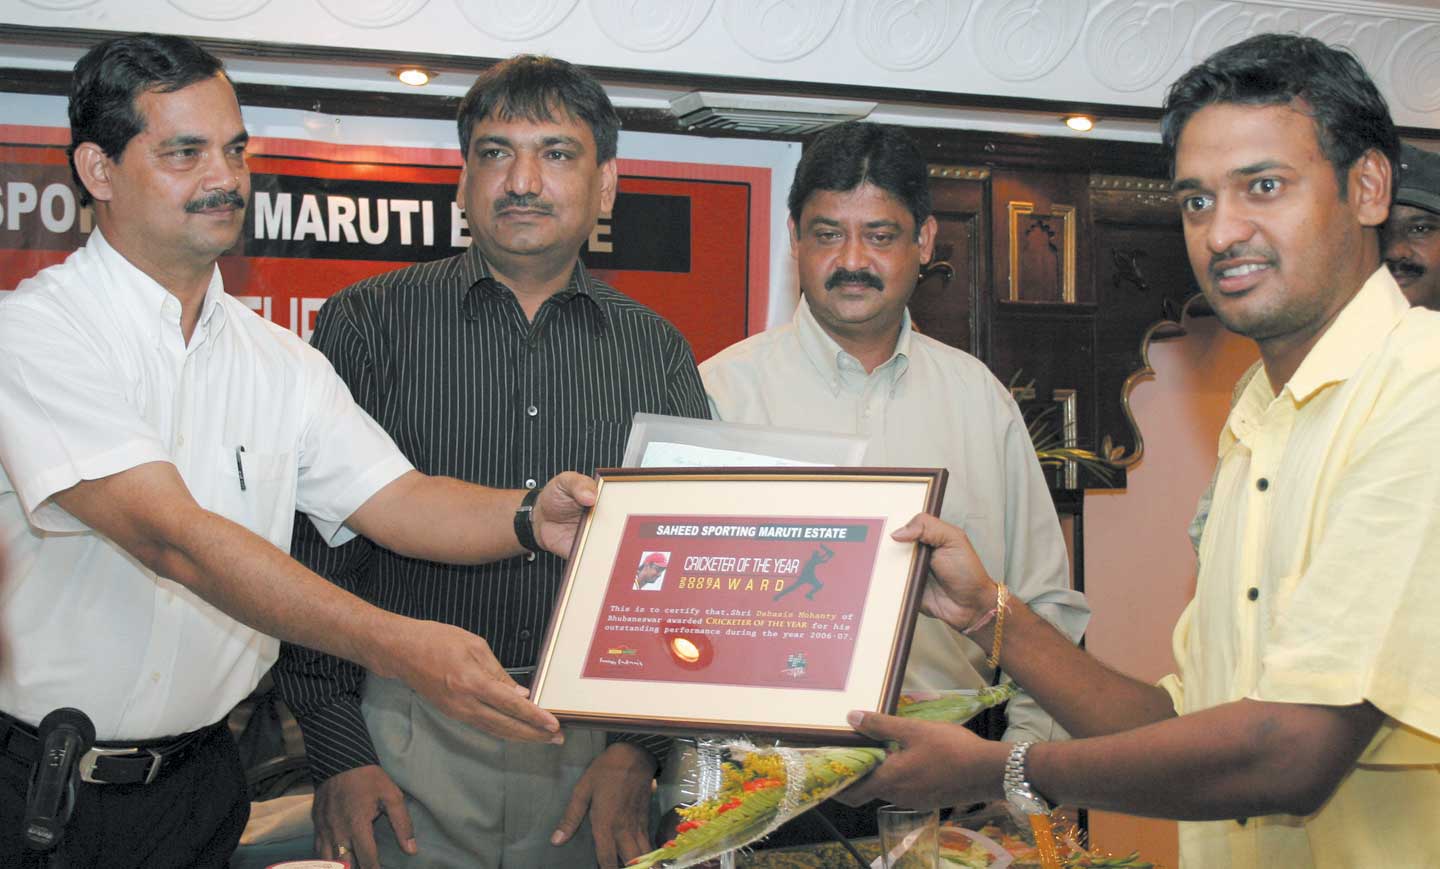 World Cupper Debasis Mohanty (Right) receives the Maruti Estate Saheed Sporting Cricketer of the Year Award in Bhubaneswar on April 16, 2008.